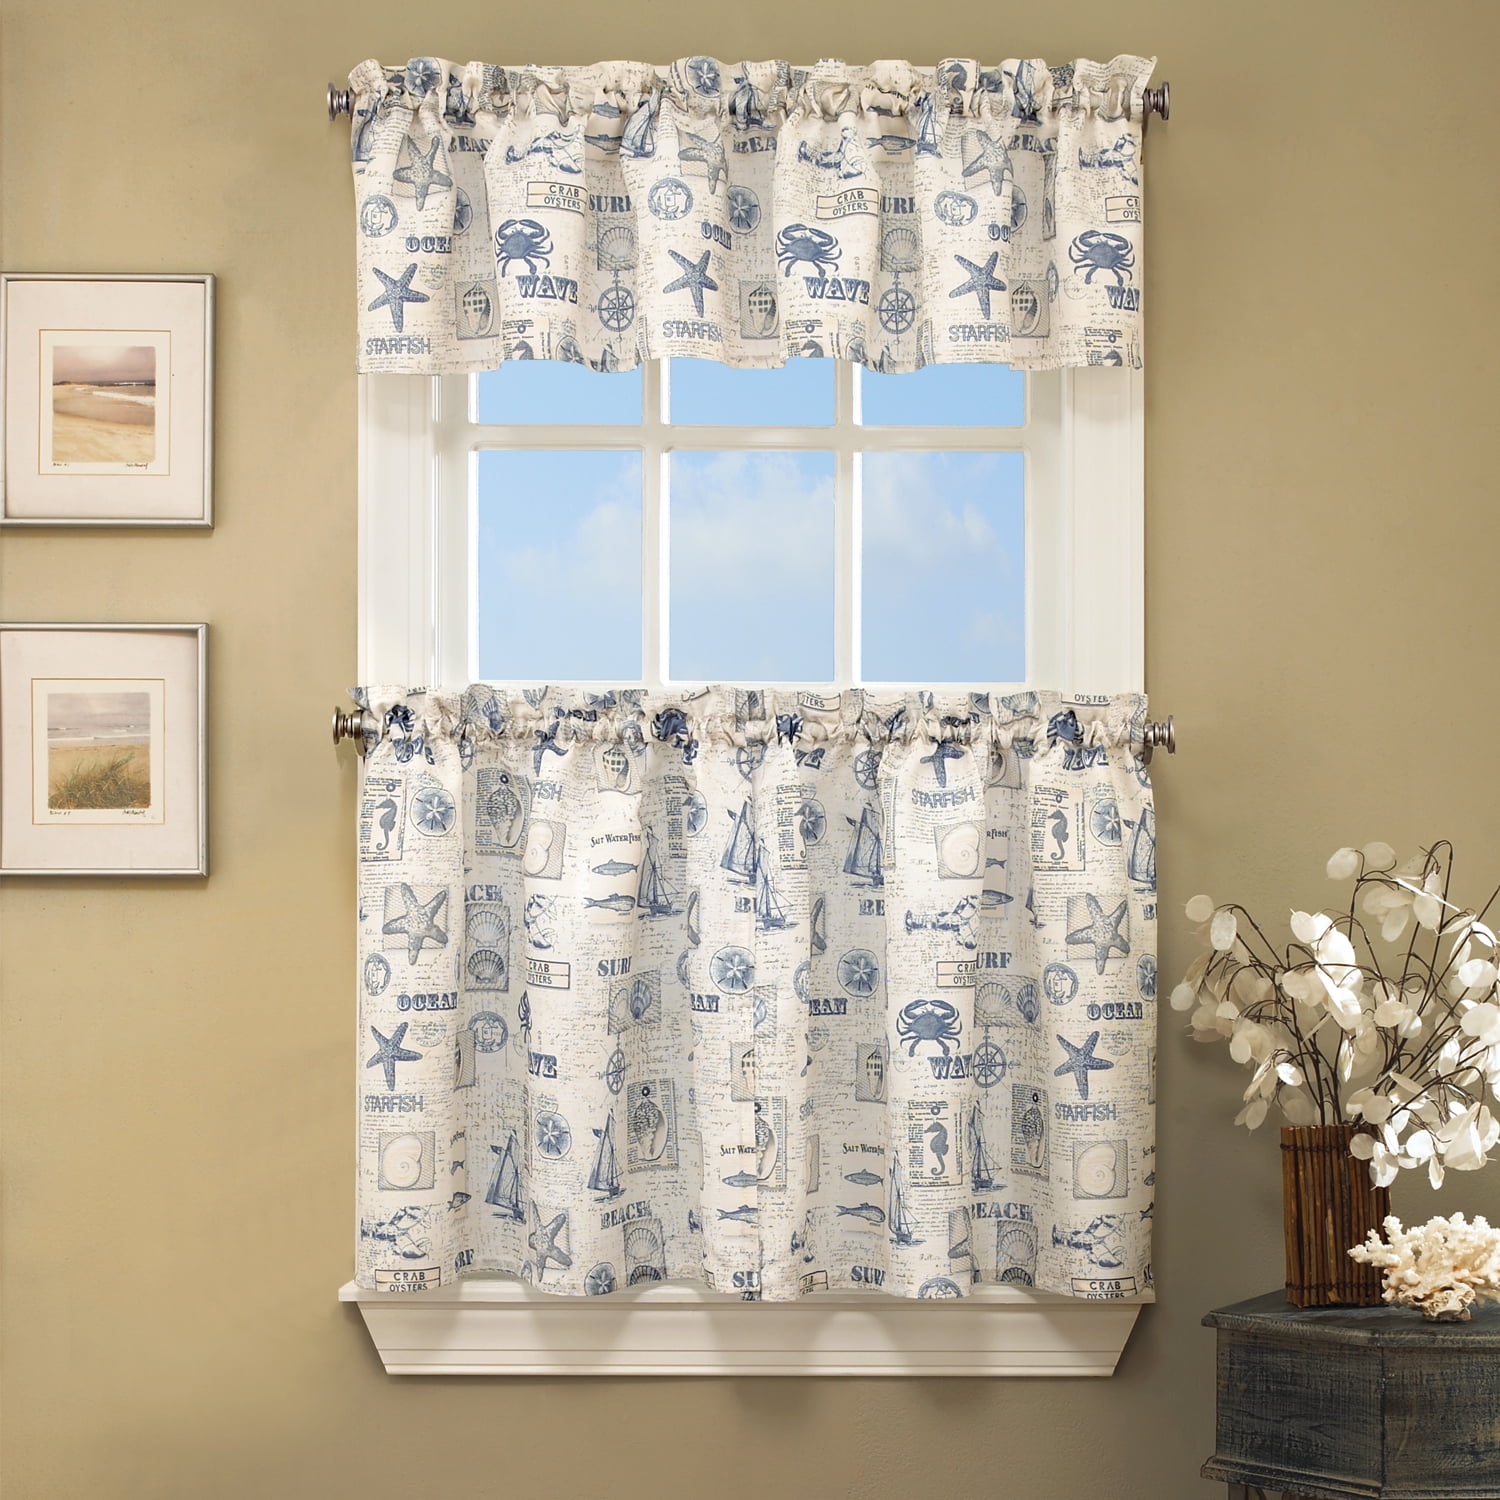 By The Sea Printed Ocean Beach Images Kitchen Curtains 24